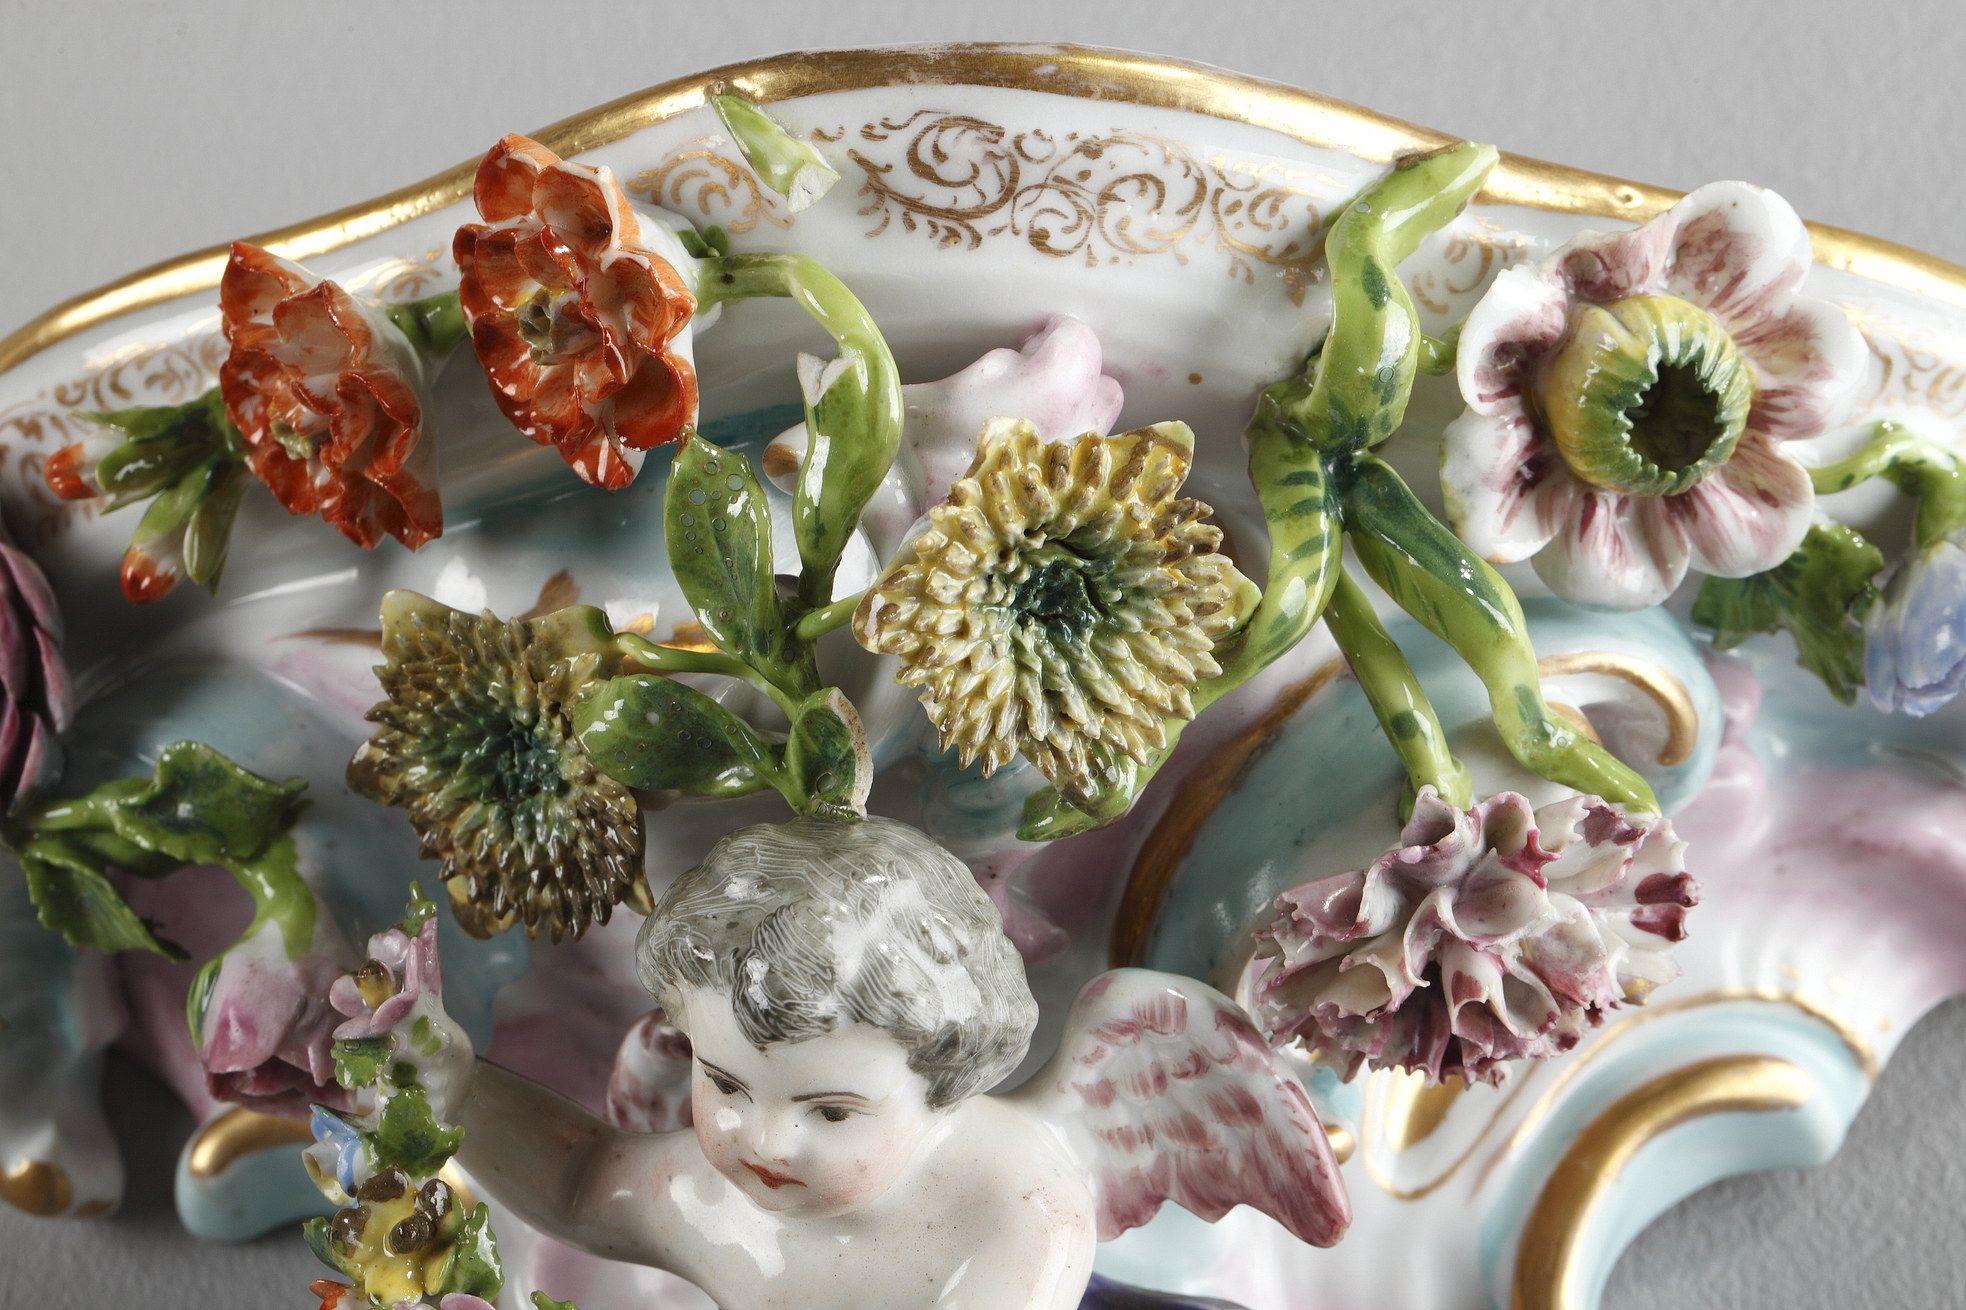 PAIR OF SMALL ROCAILLE CONSOLES IN THE STYLE OF THE MEISSEN FACTORY